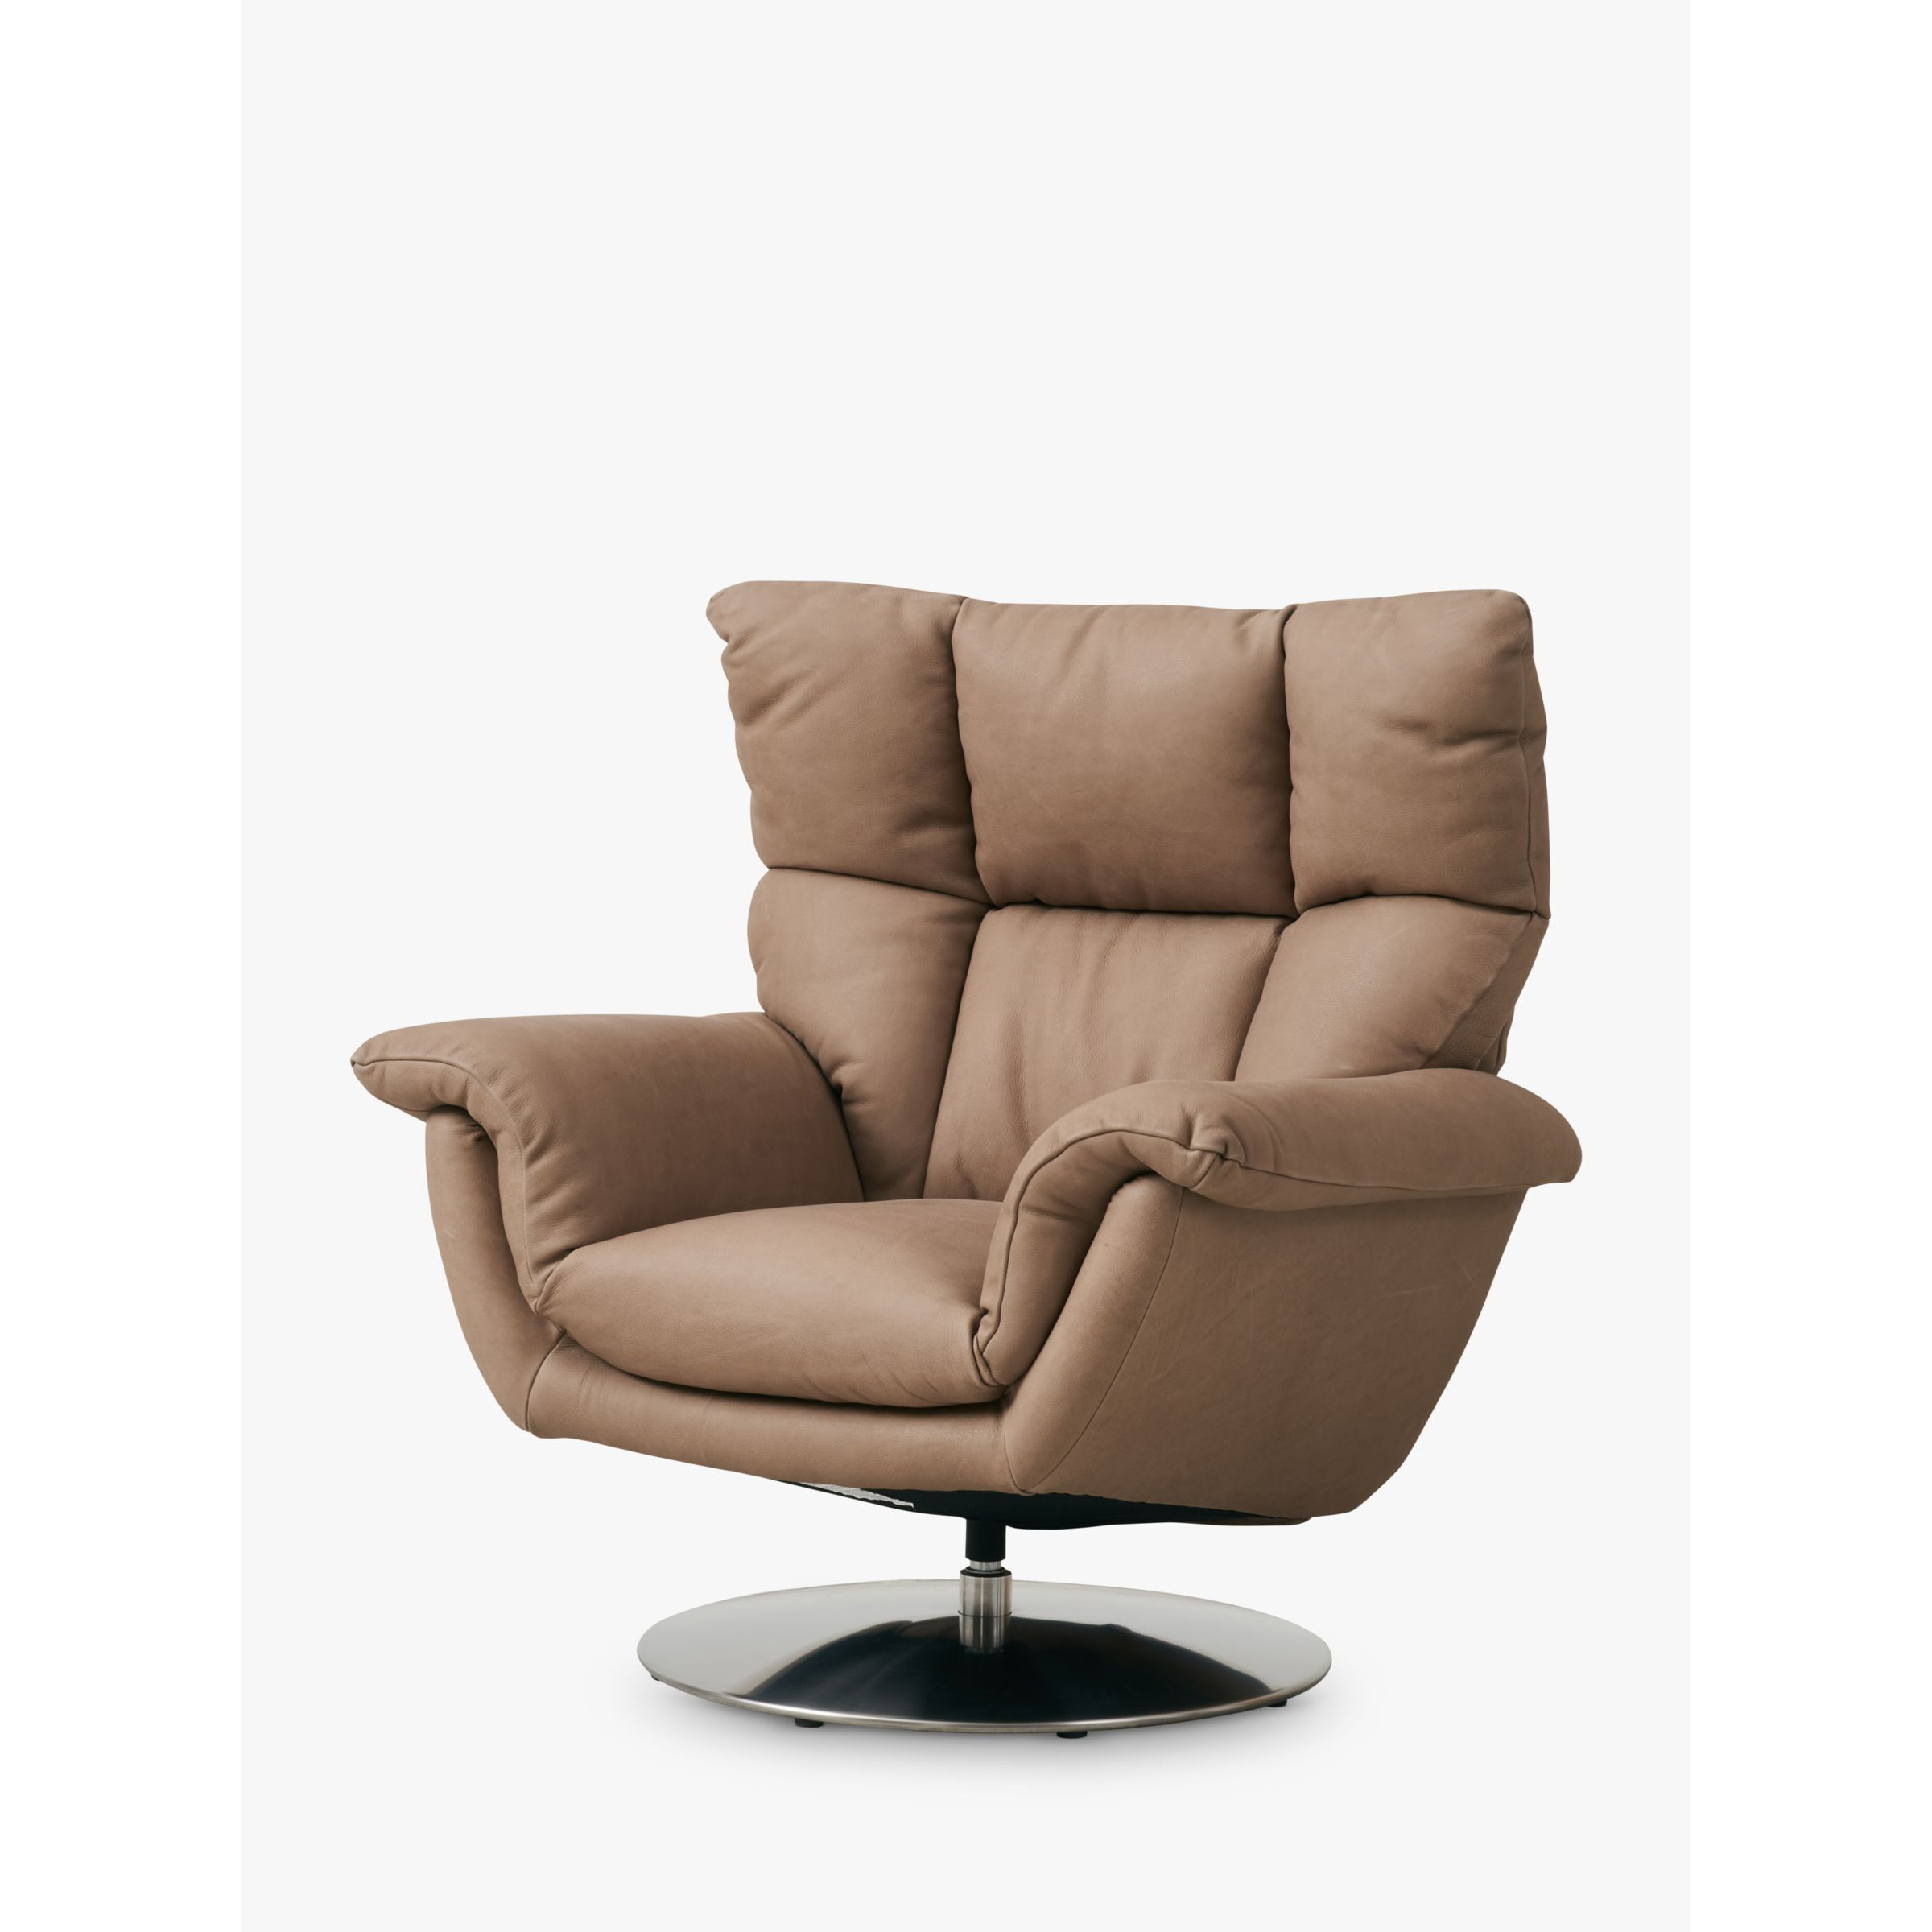 Halo Boss Leather Swivel Chair, Metal Leg, Tipped Taupe - image 1